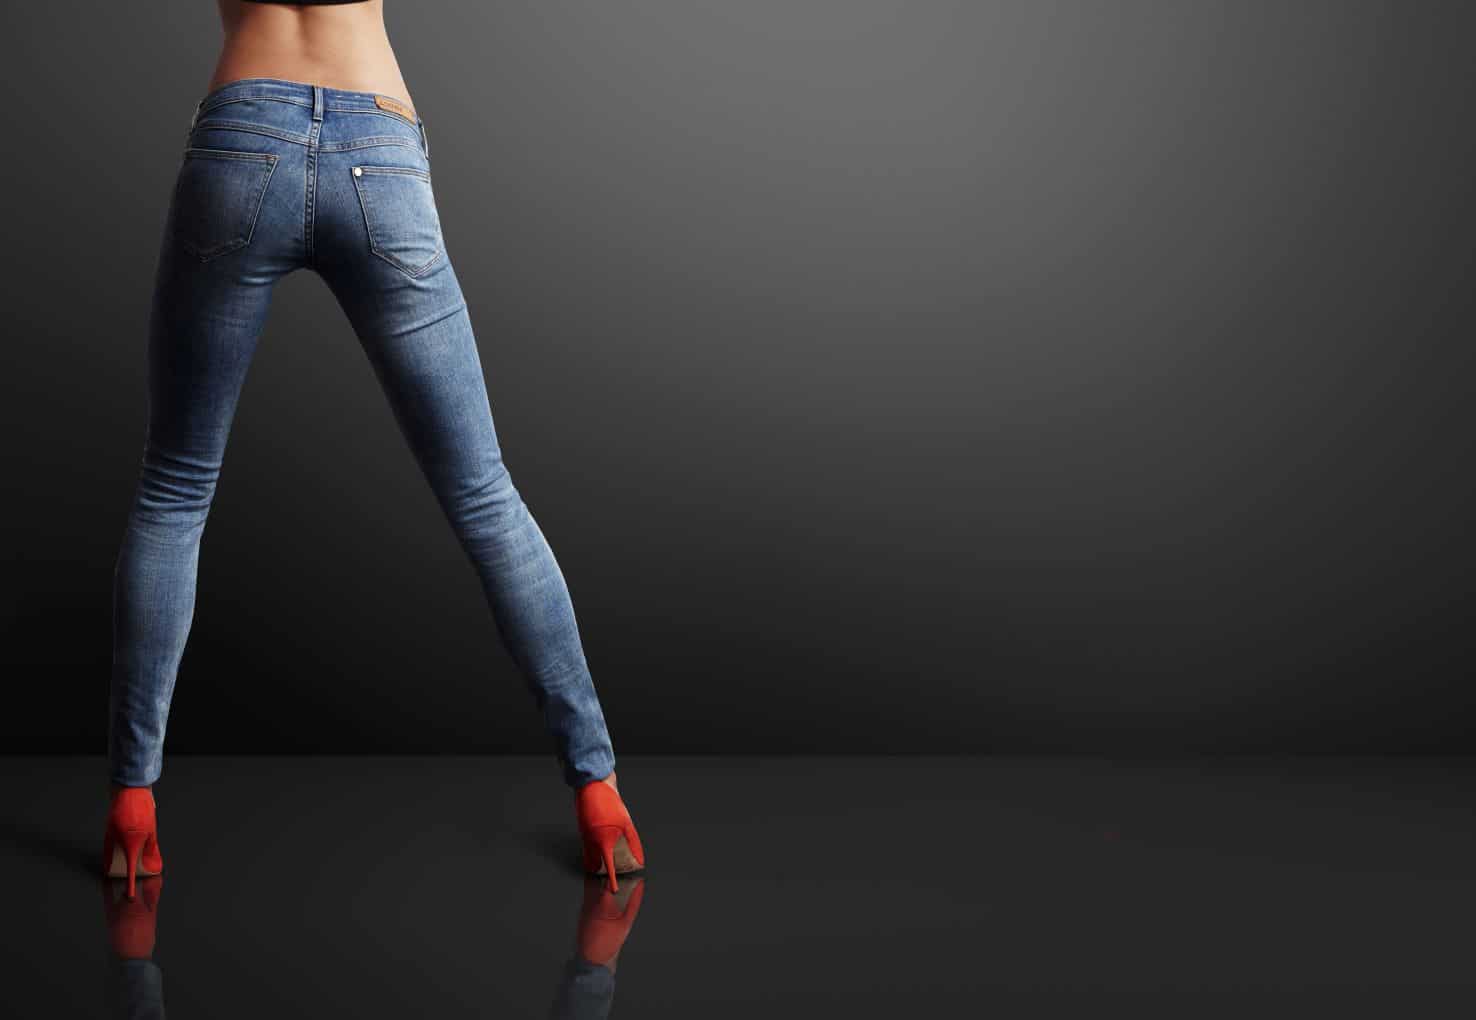 Skinny jeans are 'never going away' despite pandemic squeeze on sales